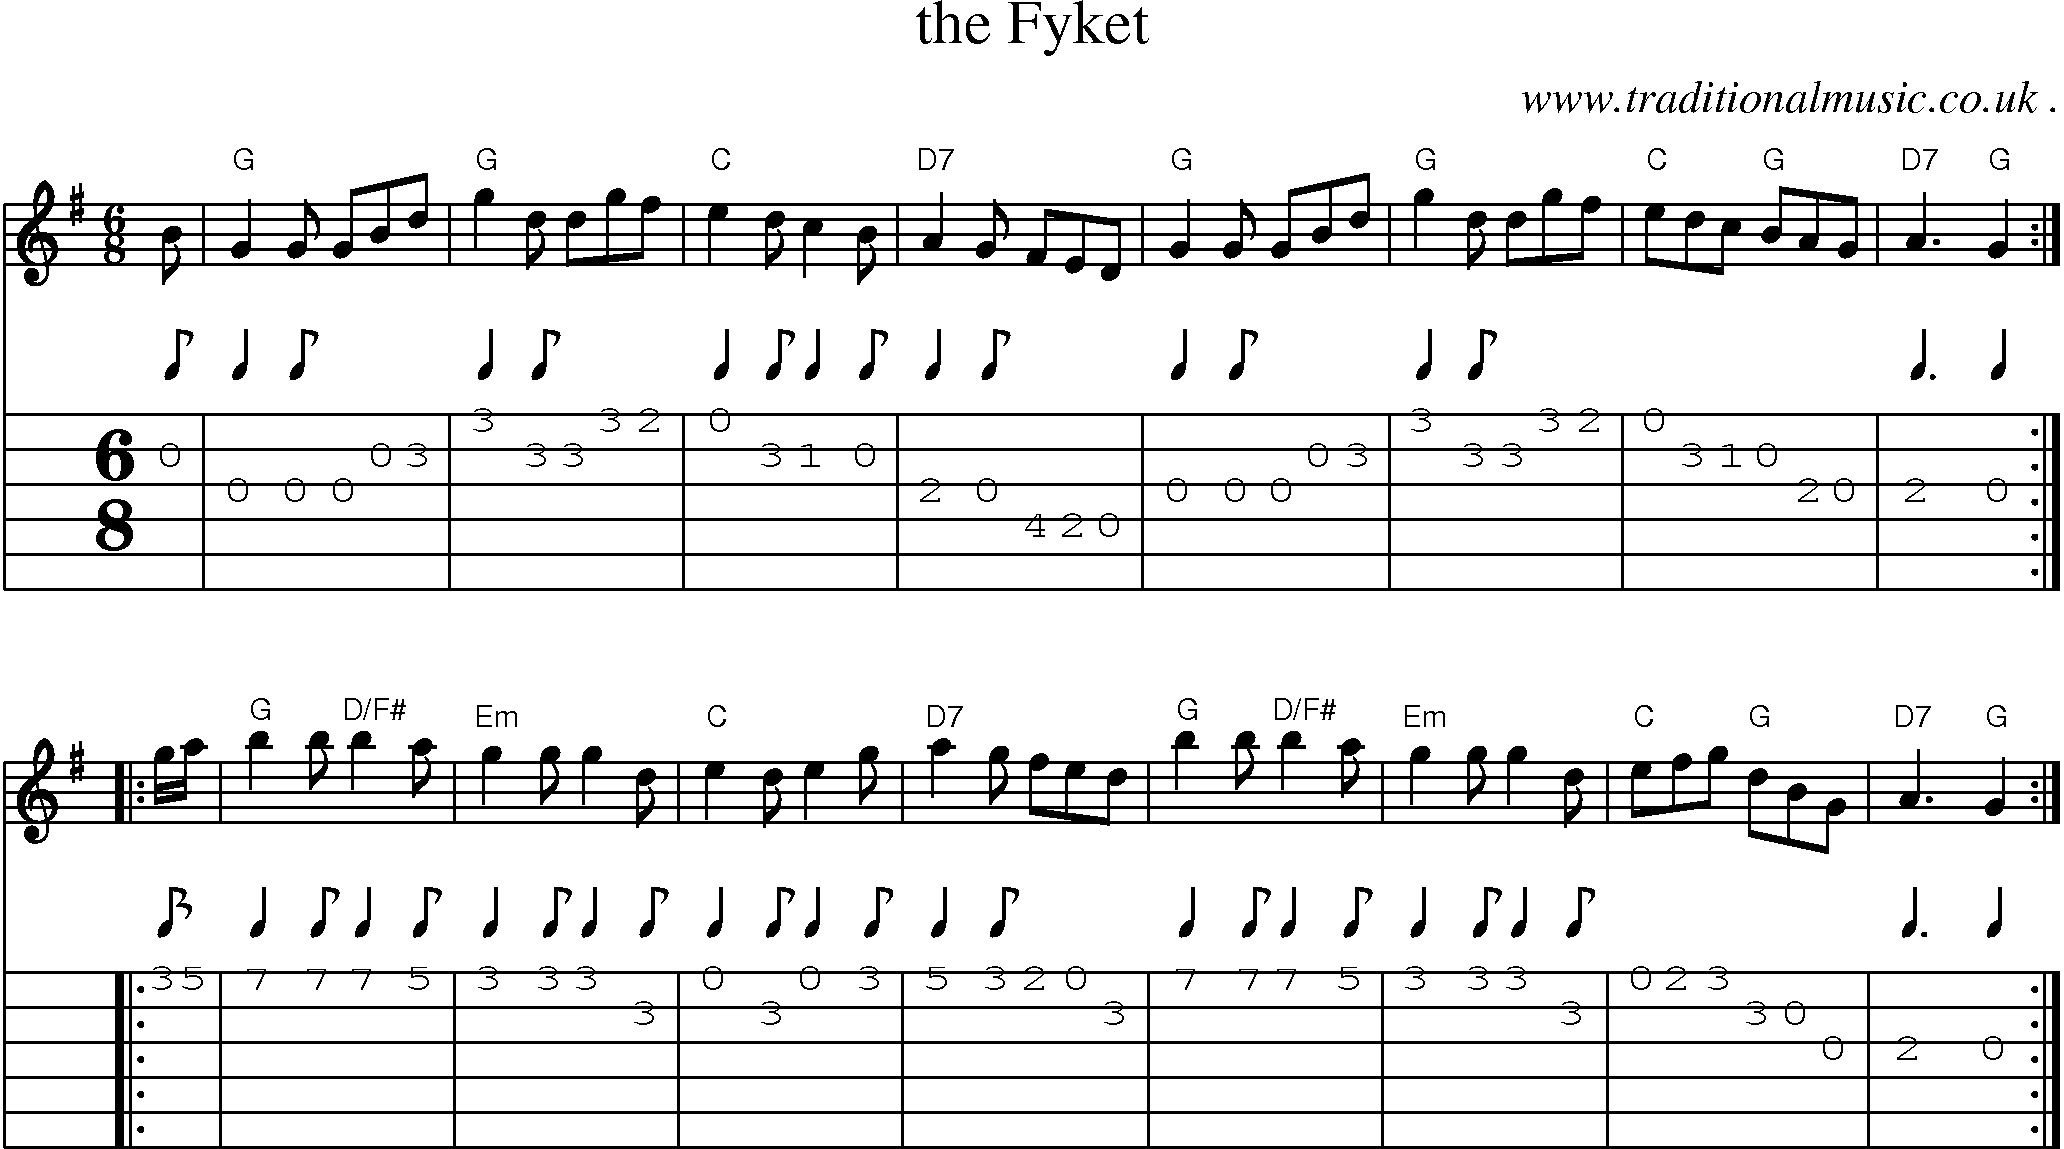 Sheet-music  score, Chords and Guitar Tabs for The Fyket